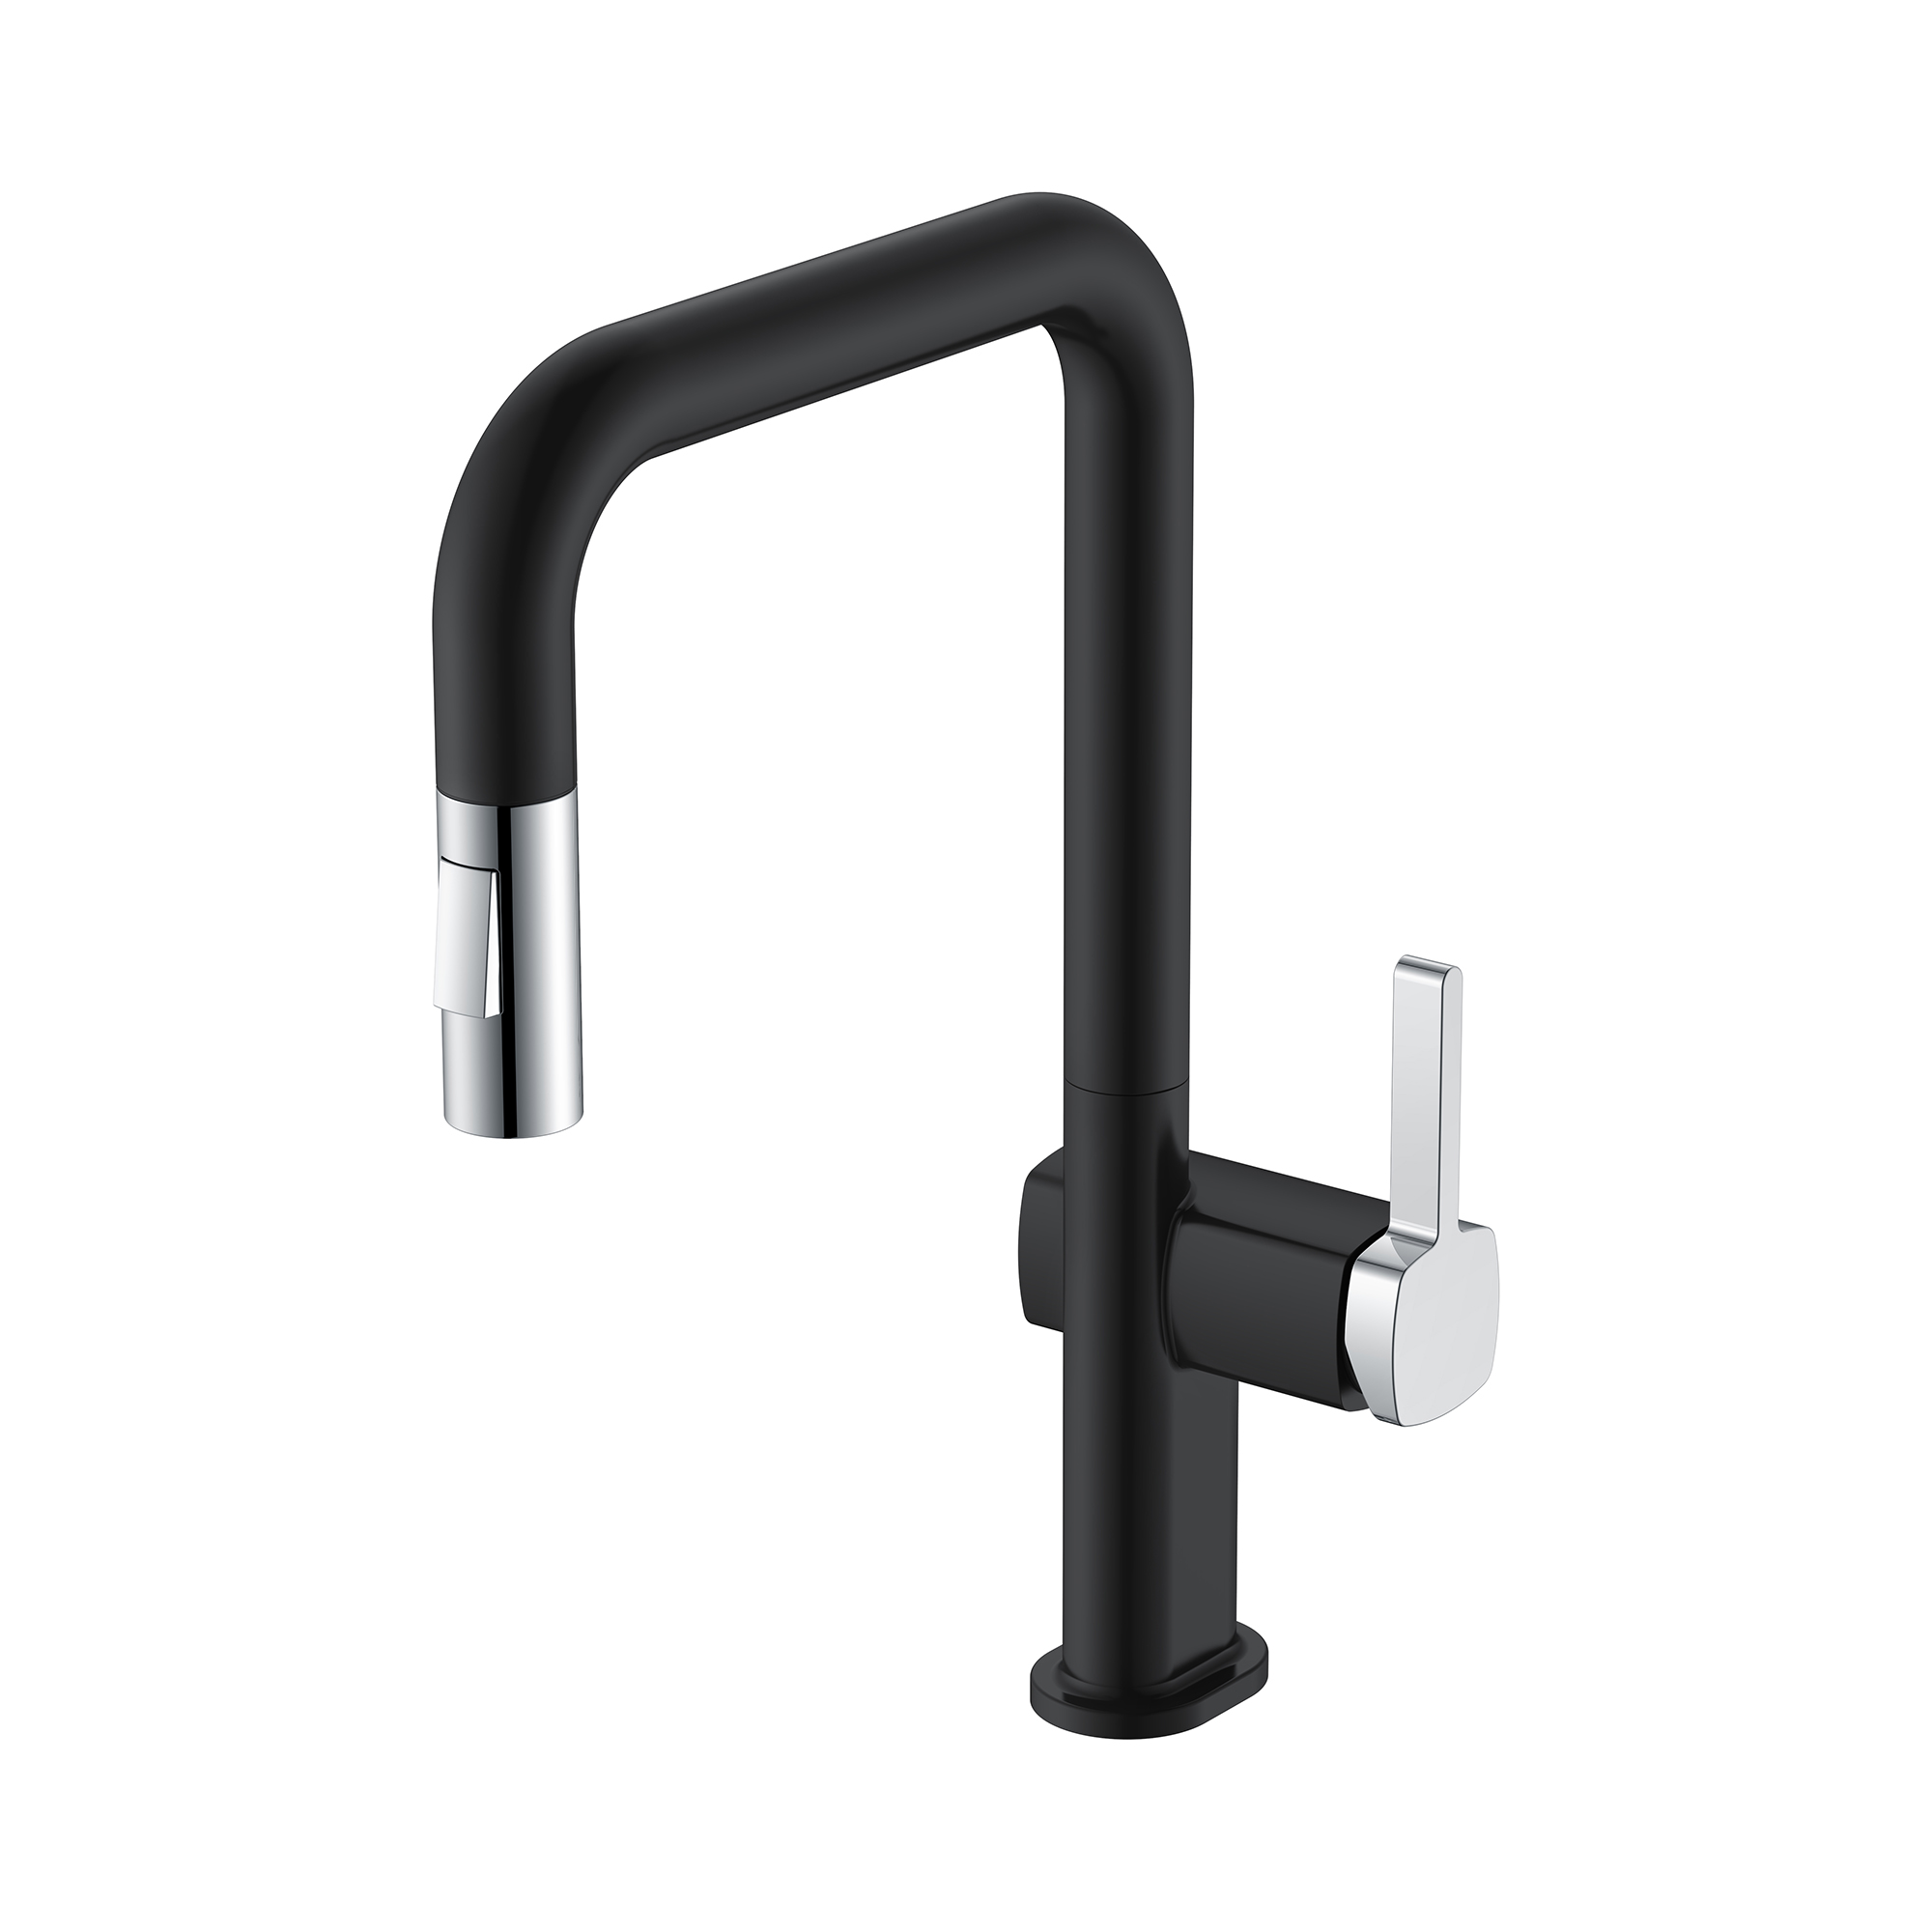 Lasted Design Single Hole Pull Down Black Kitchen Faucet